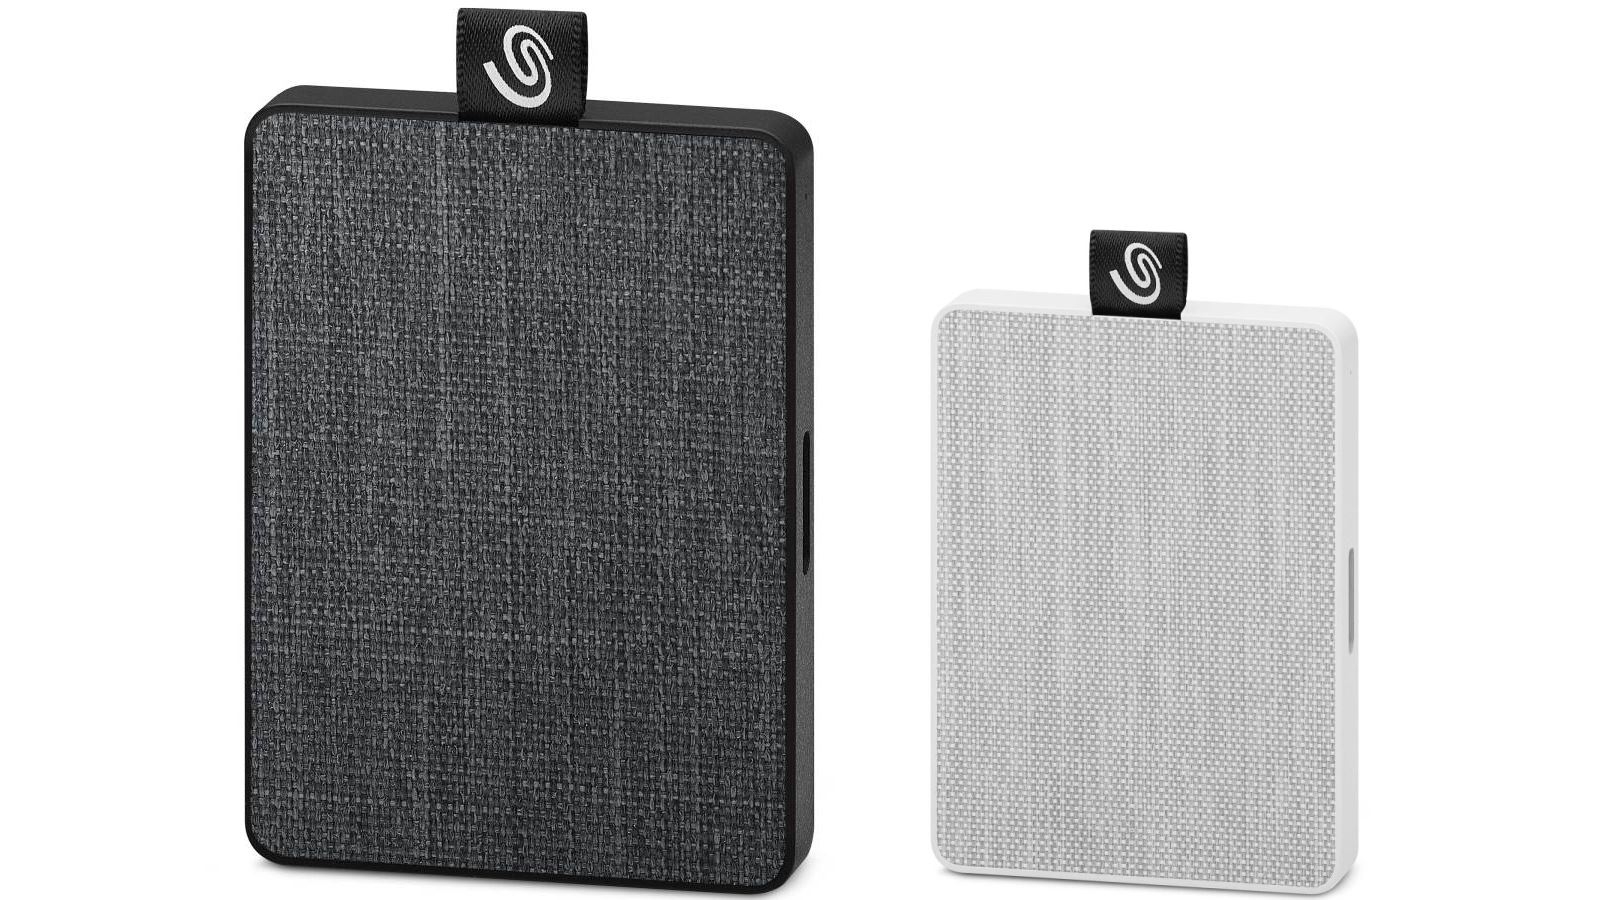 Inspektion Niende Efterligning Buy Seagate One Touch SSD 500GB USB3.0 Portable SSD | Harvey Norman AU